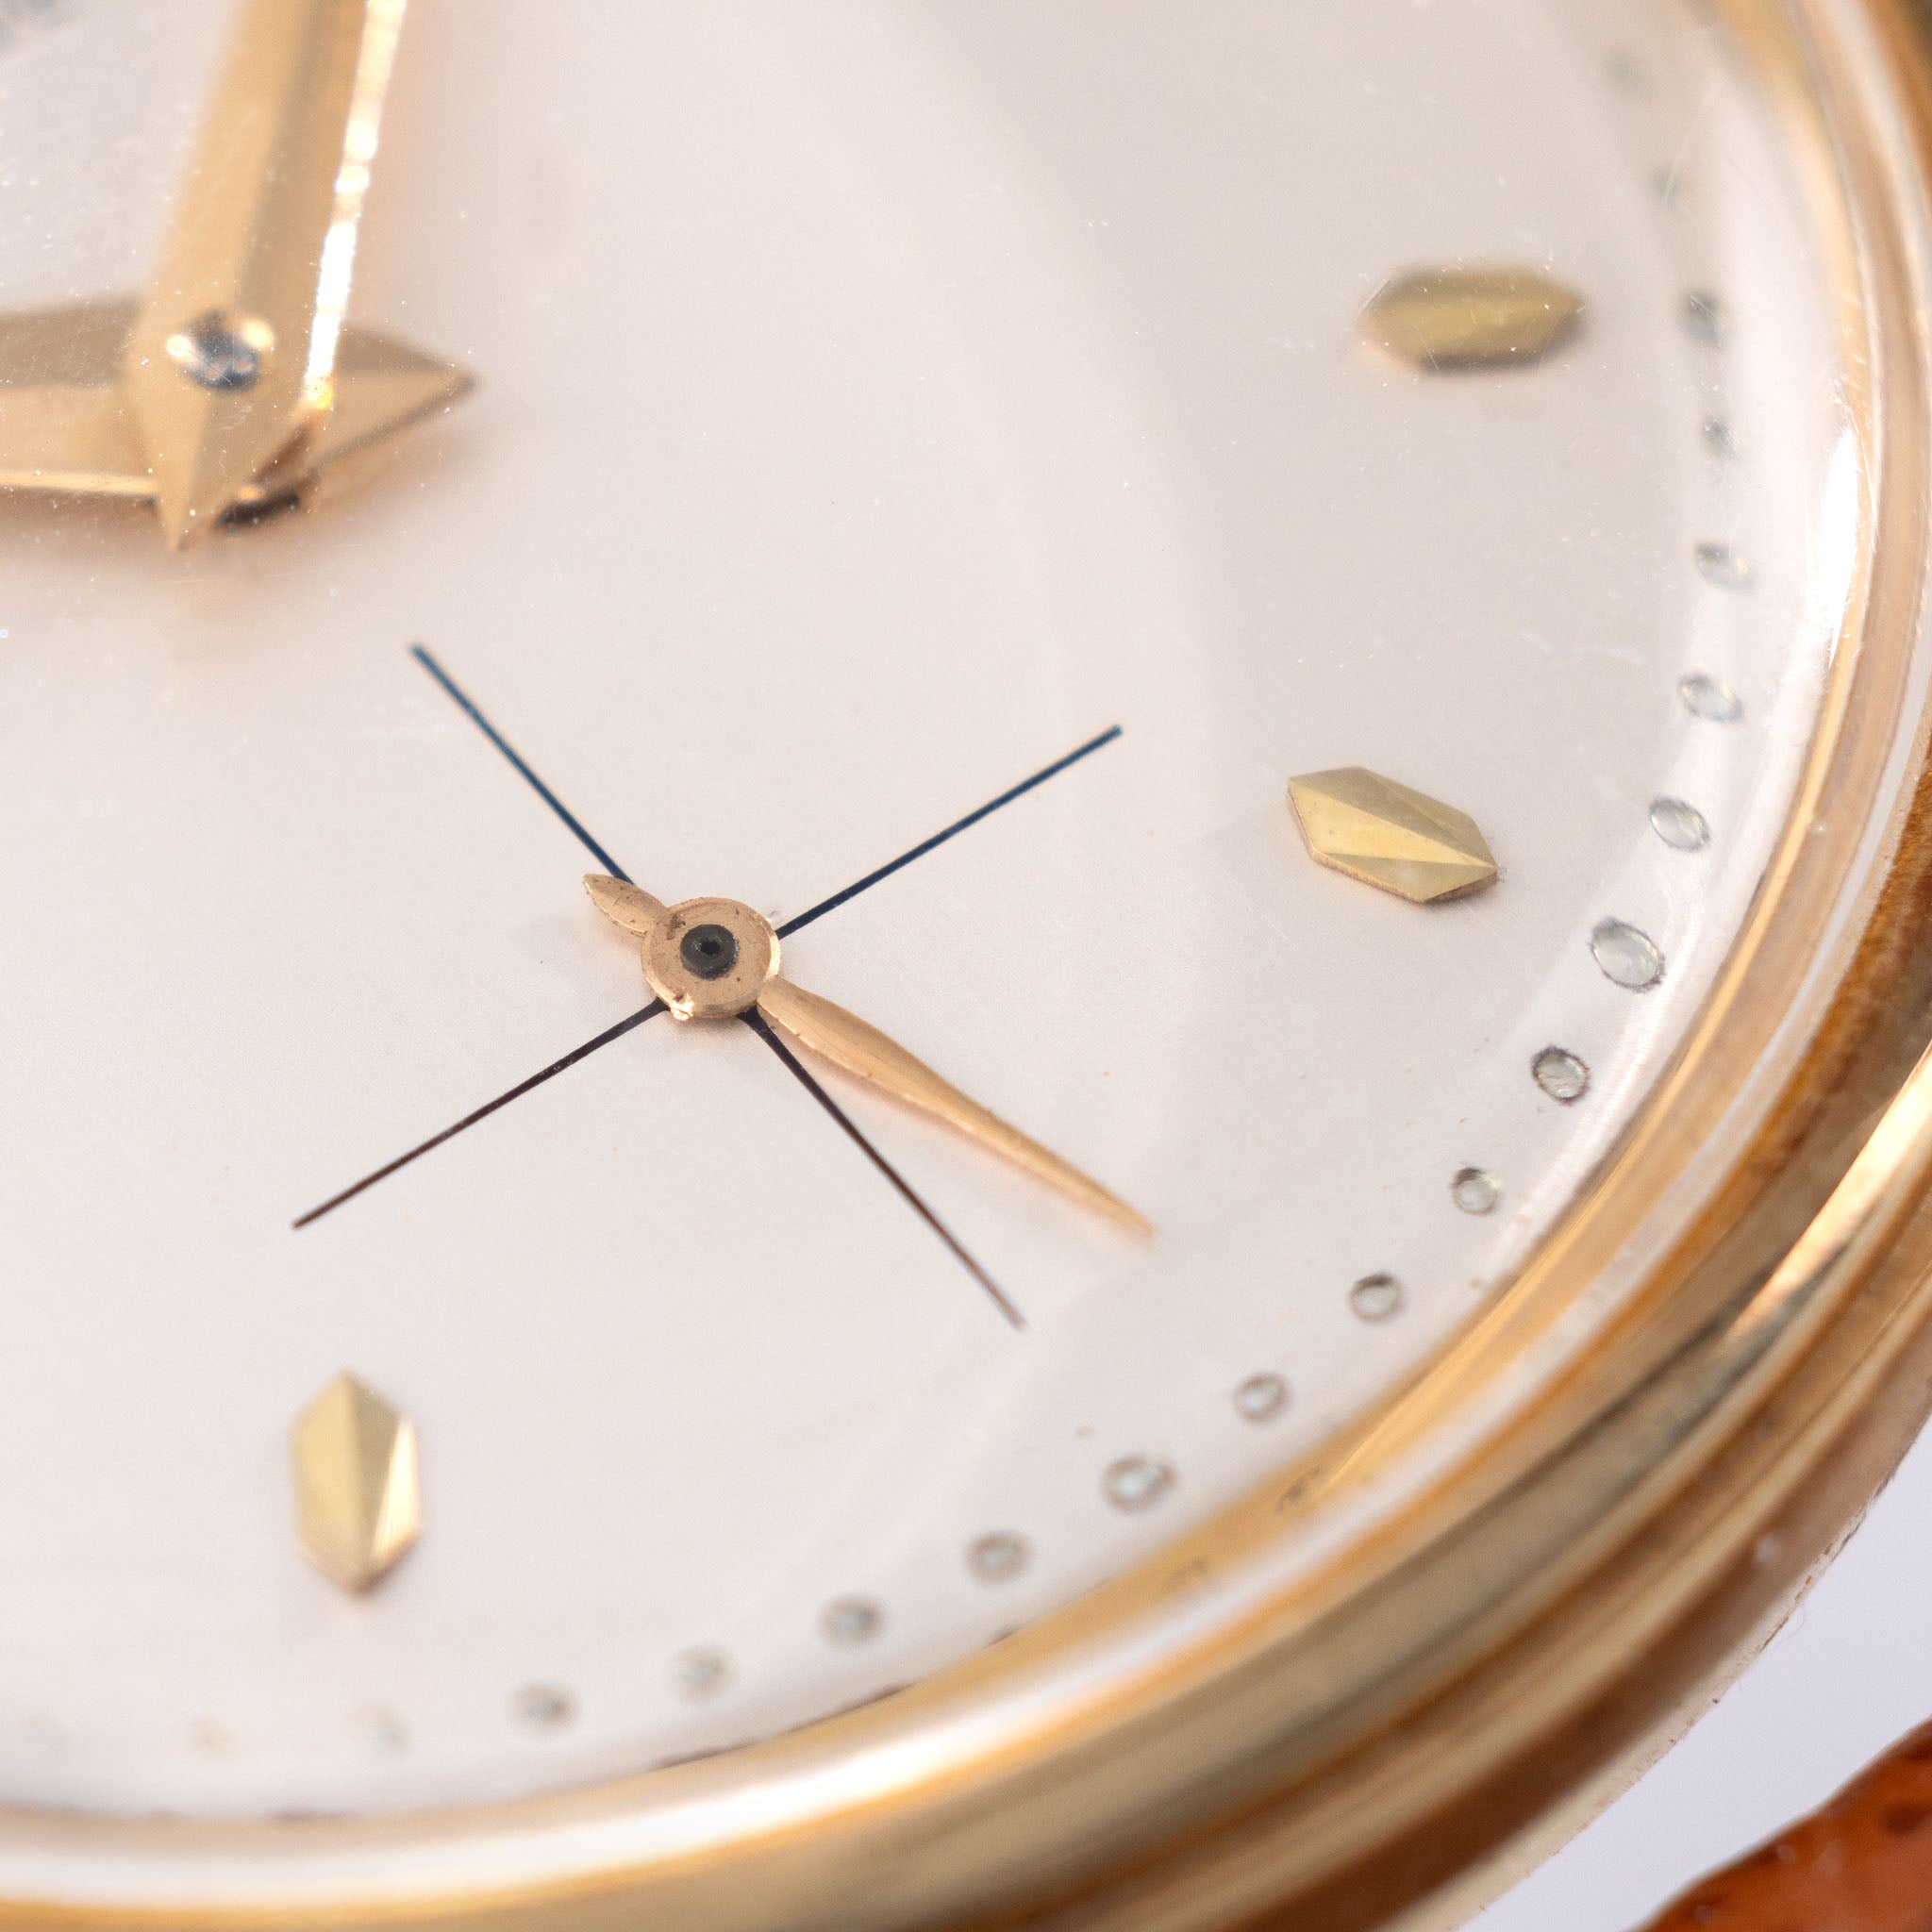 Patek Philippe Calatrava “Amagnetic” with Extract from the Archives Ref 2509